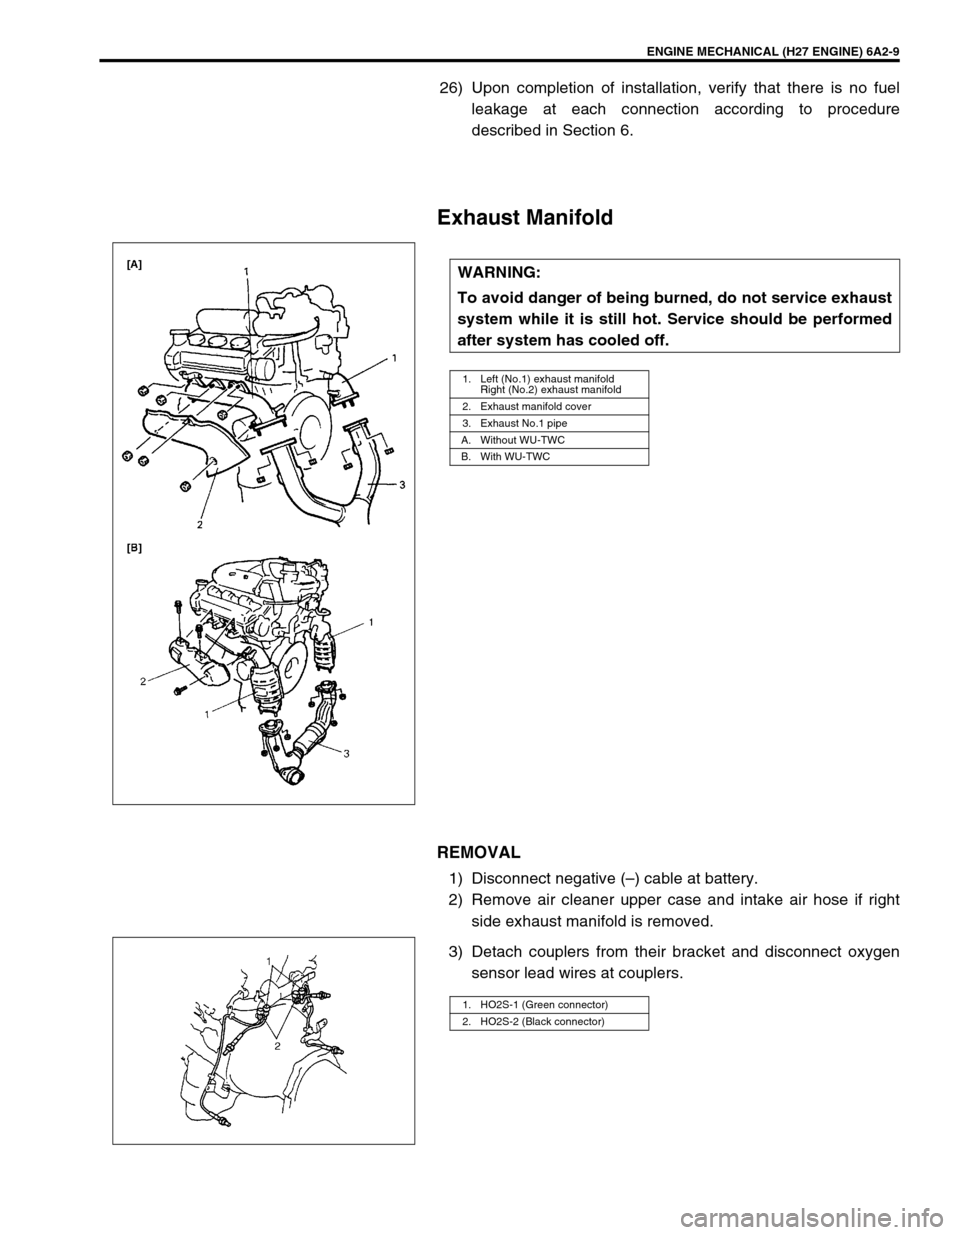 SUZUKI GRAND VITARA 2001 2.G User Guide ENGINE MECHANICAL (H27 ENGINE) 6A2-9
26) Upon completion of installation, verify that there is no fuel
leakage at each connection according to procedure
described in Section 6.
Exhaust Manifold
REMOVA